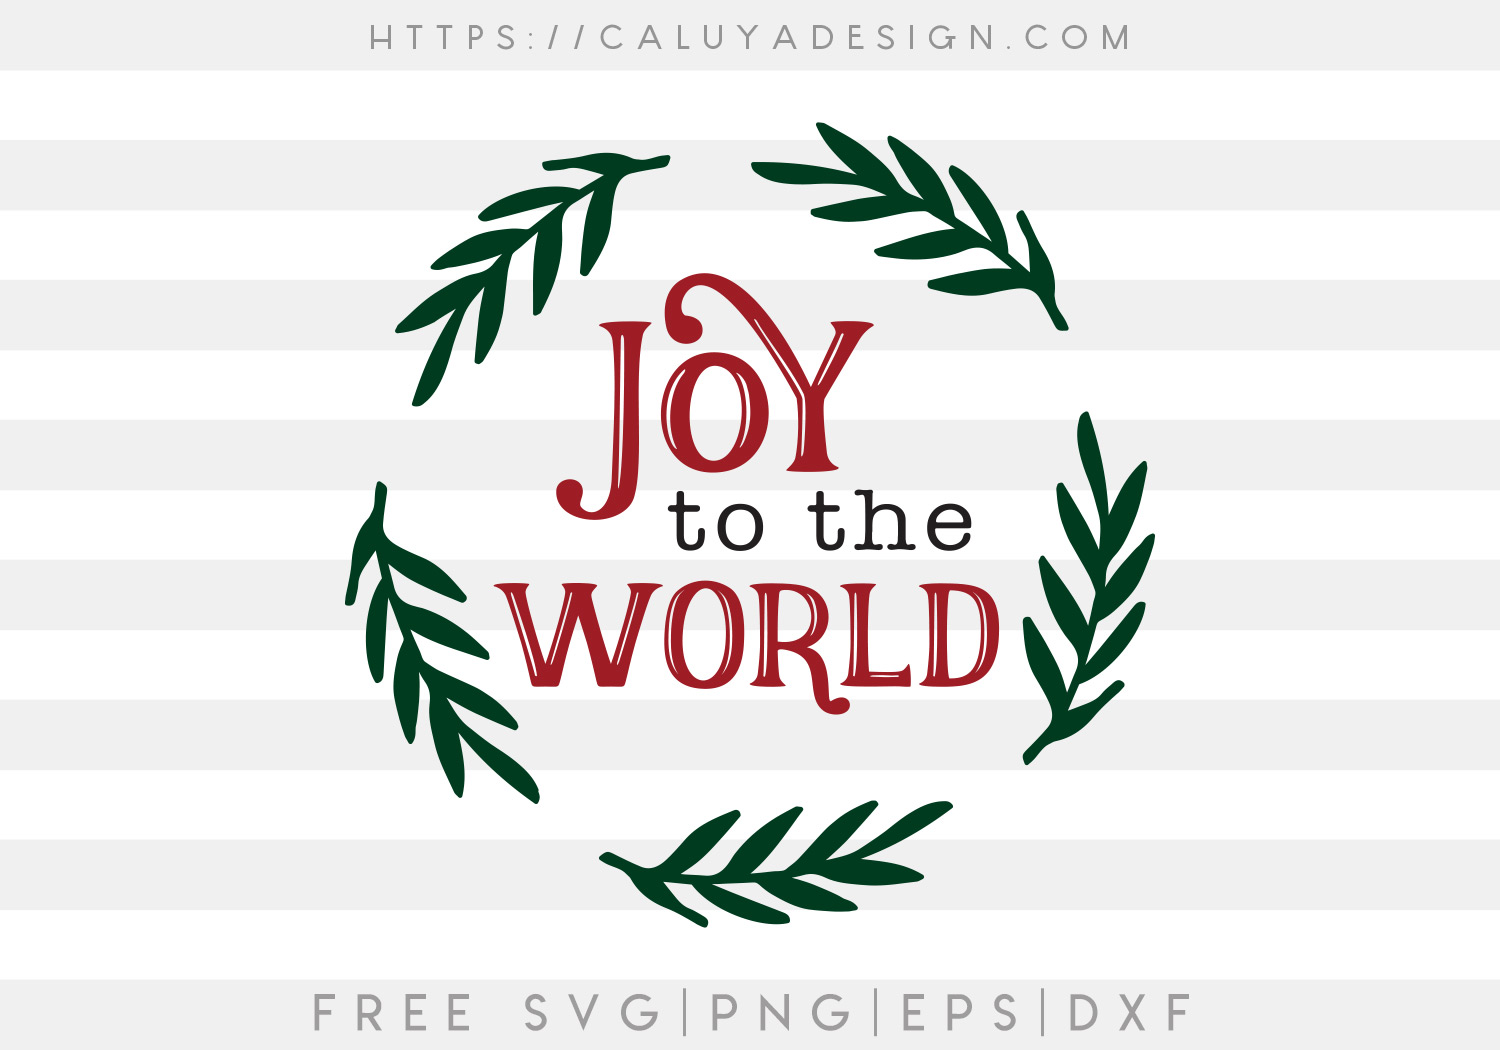 Joy To the World SVG, PNG, EPS & DXF